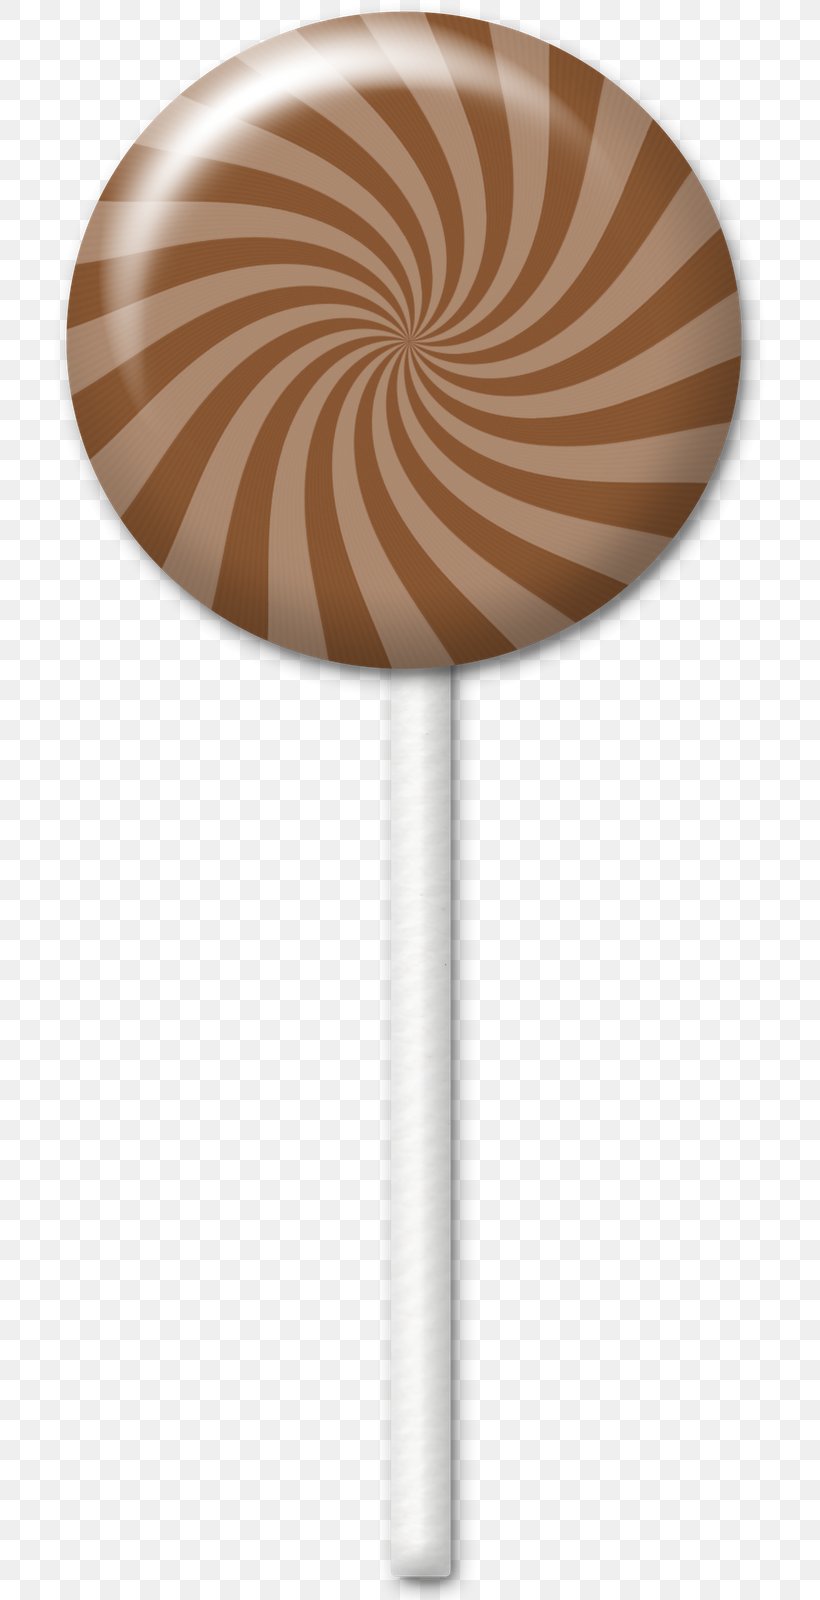 Lollipop Candy Cane Chocolate Ice Cream Frosting & Icing, PNG, 718x1600px, Lollipop, Cake, Candy, Candy Cane, Chocolate Download Free